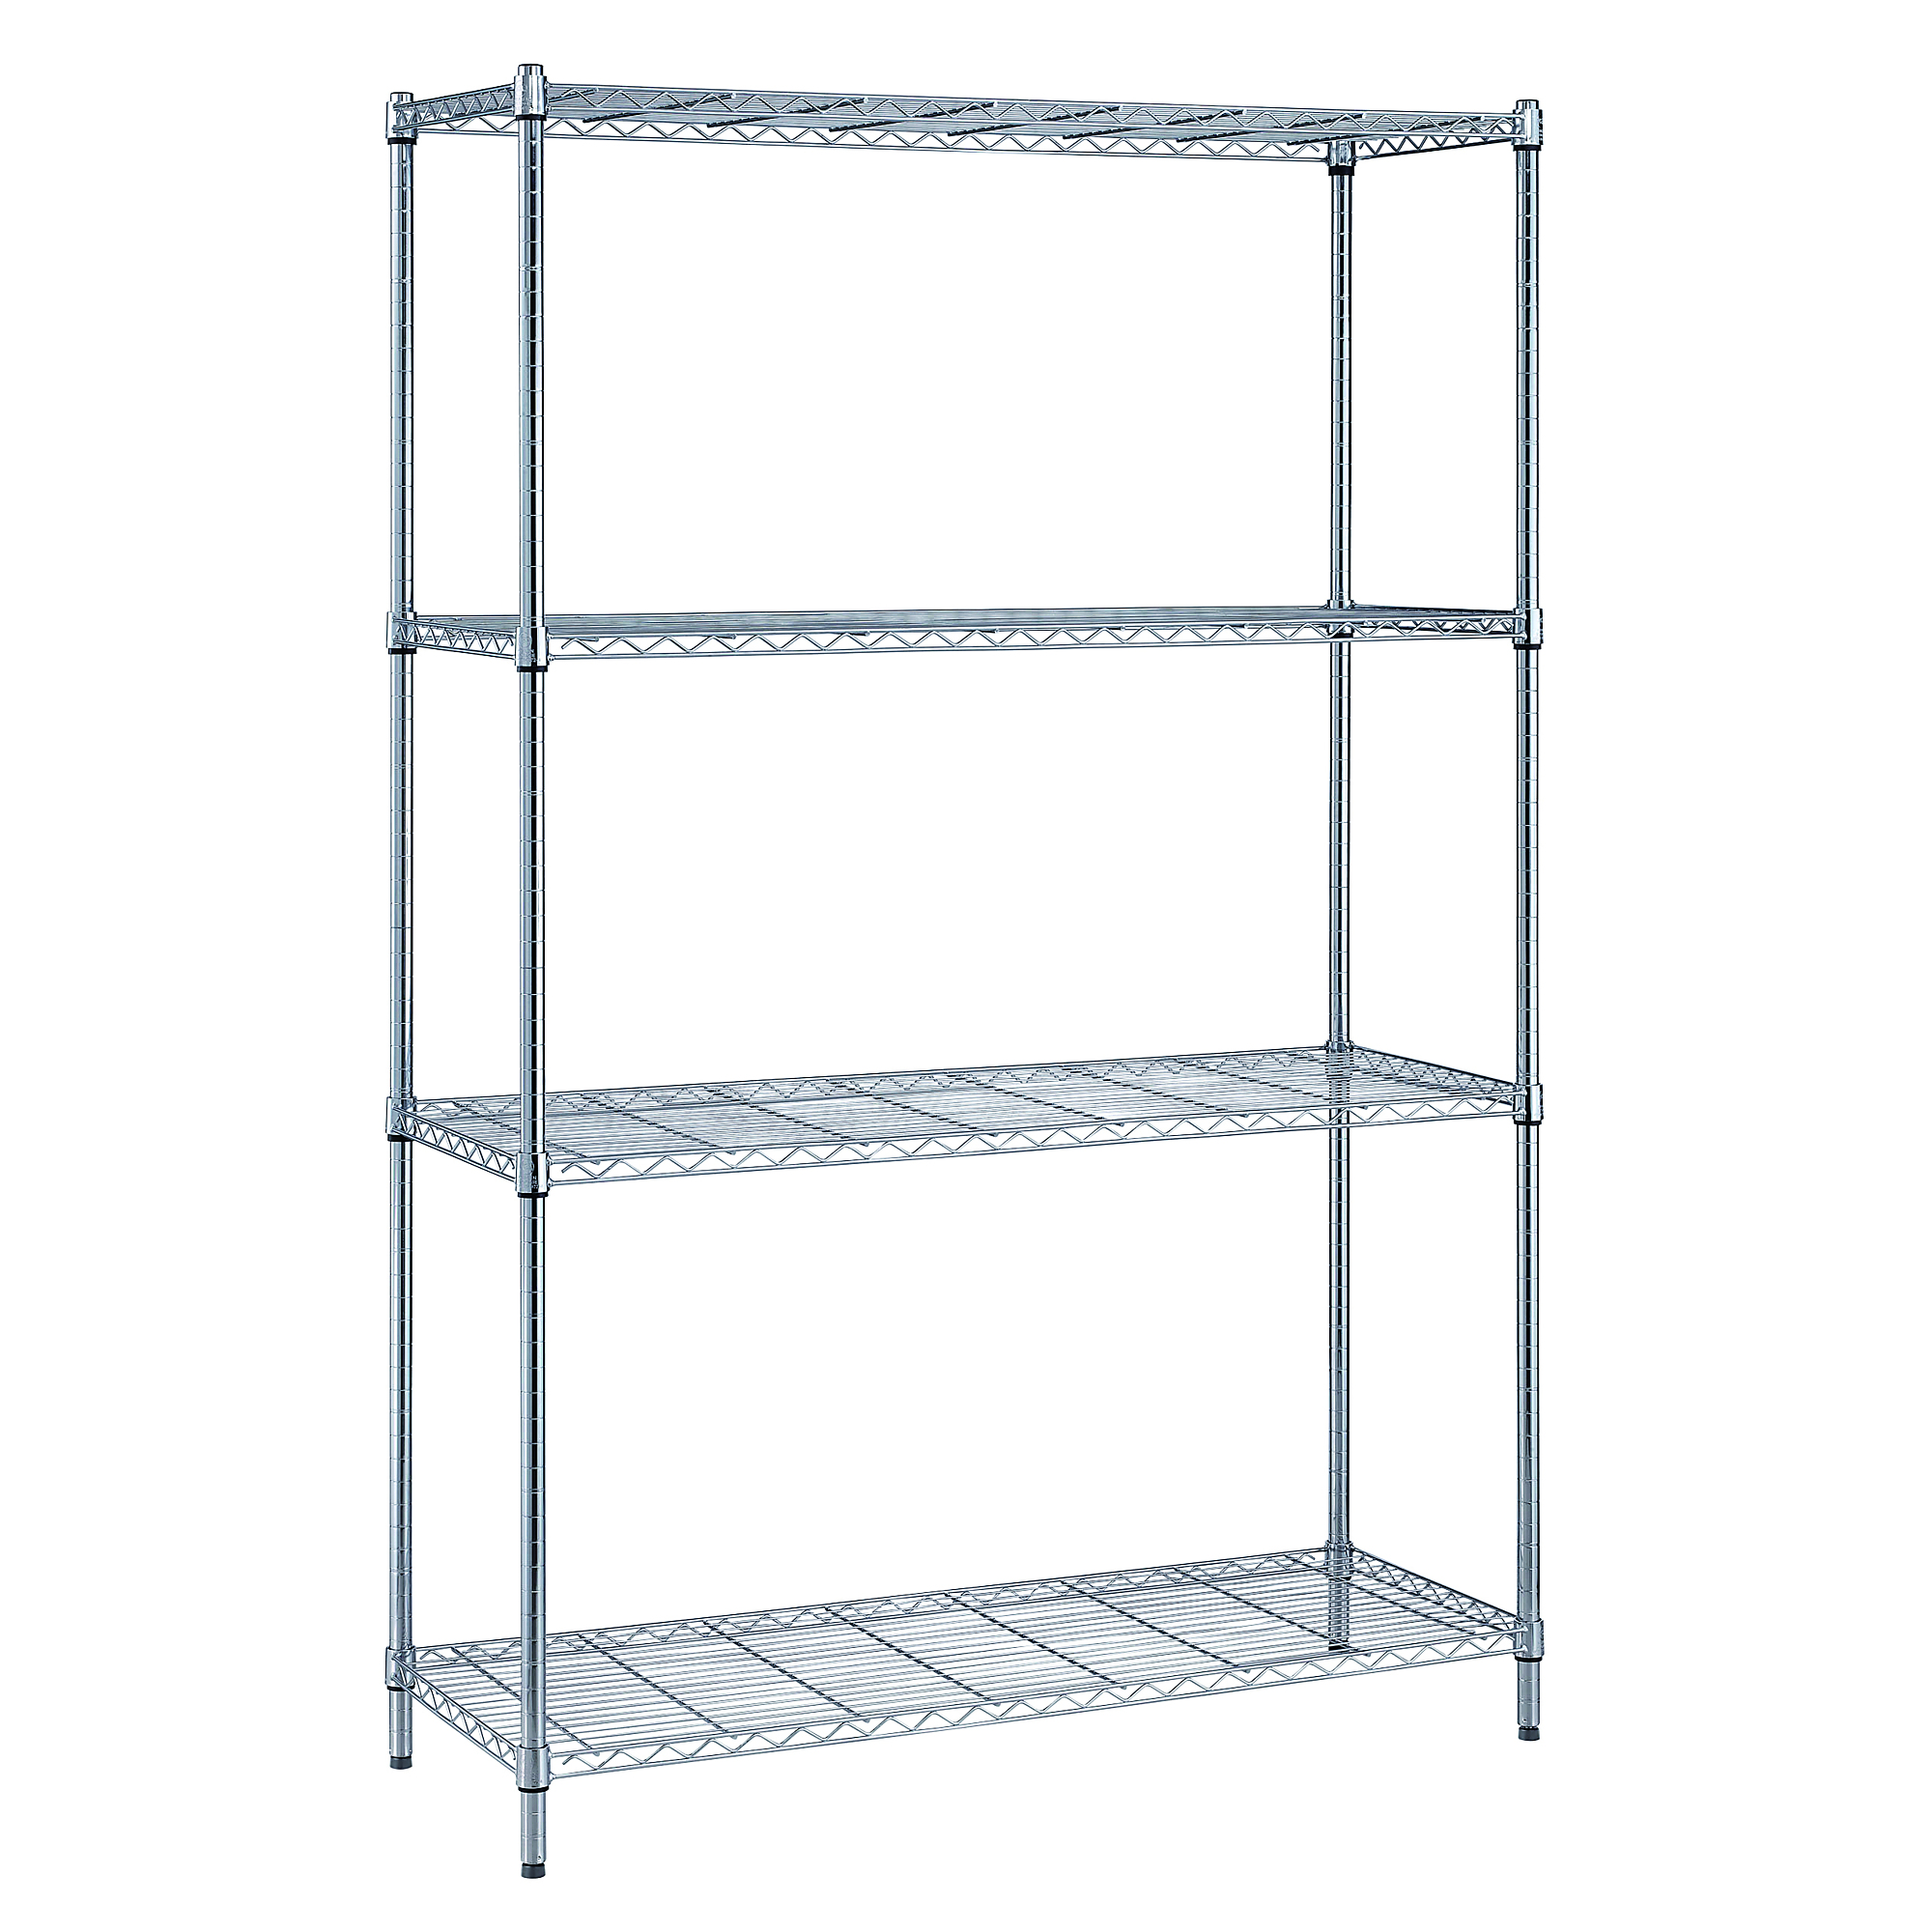 Quantum Storage, Wire 4-Shelf Unit Pk, Chrome Plated Finish, NSF, Height 72 in, Width 48 in, Depth 18 in, Model RWR72-1848LD